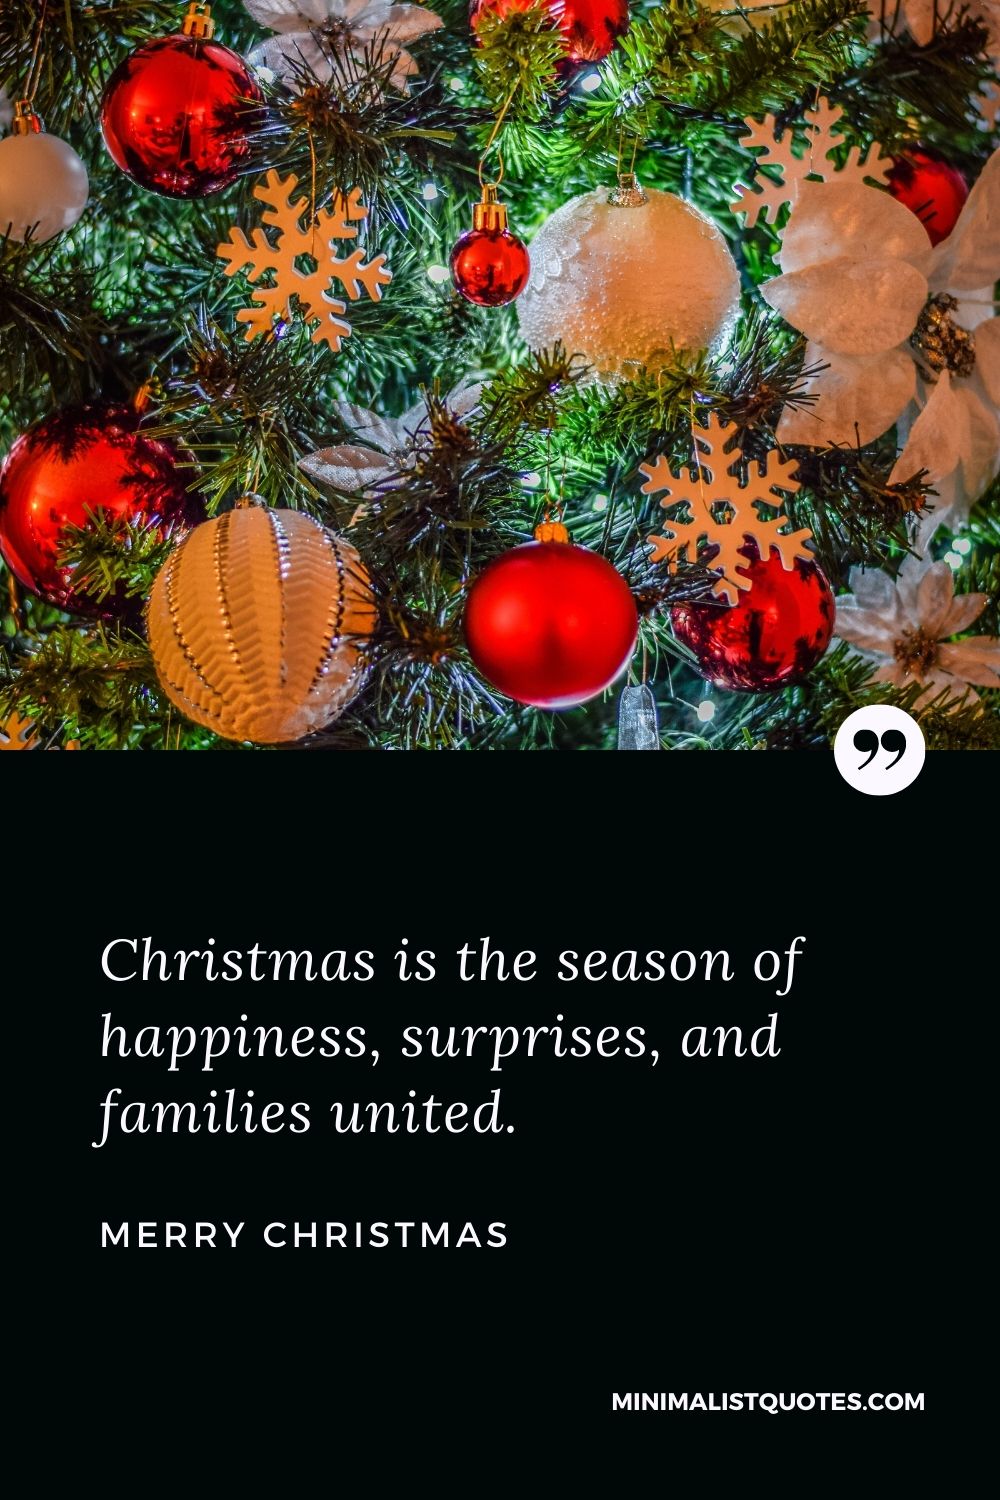 Merry Christmas Wish - Christmas is the season of happiness, surprises, and families united.